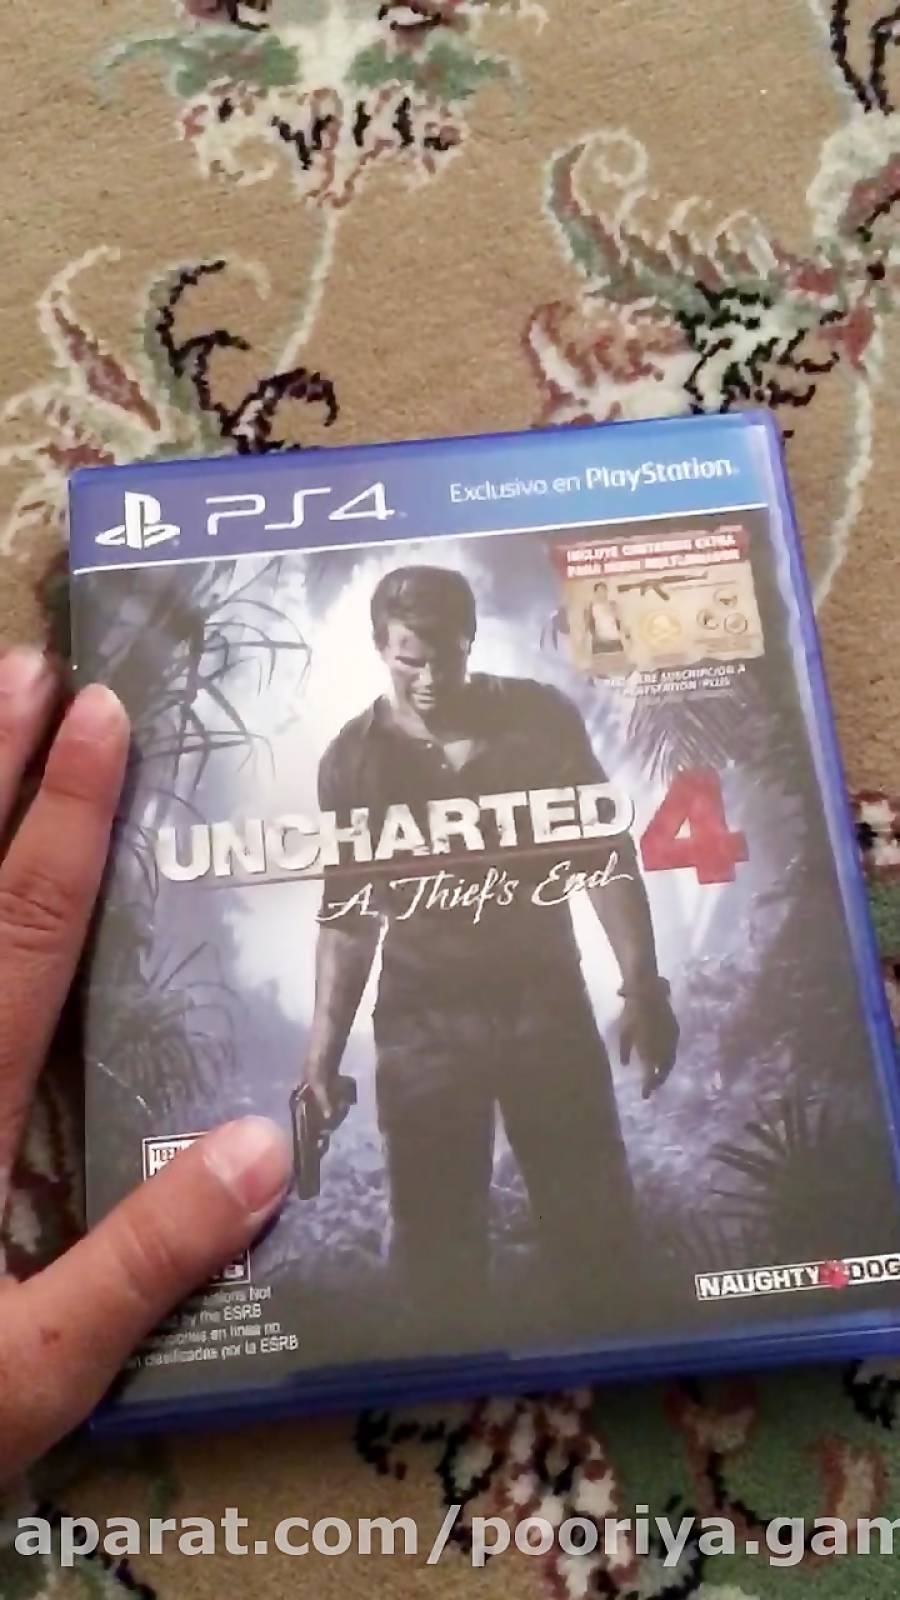 Unboxing uncharted 4